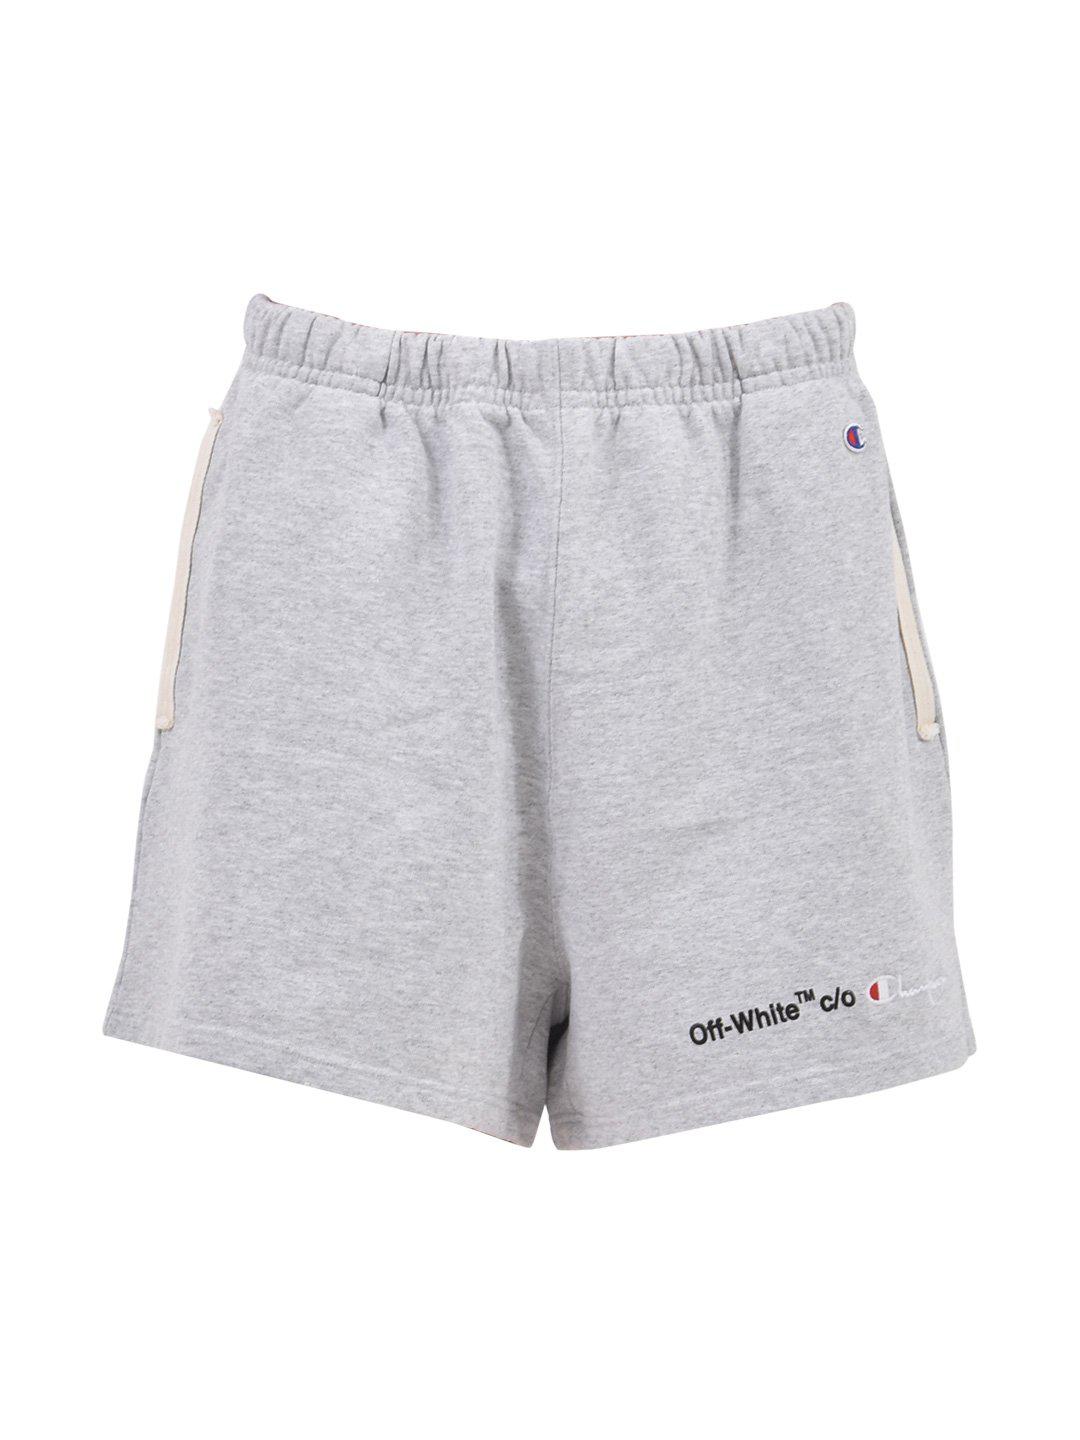 Off-White c/o Virgil Abloh X Champion Shorts in Gray |